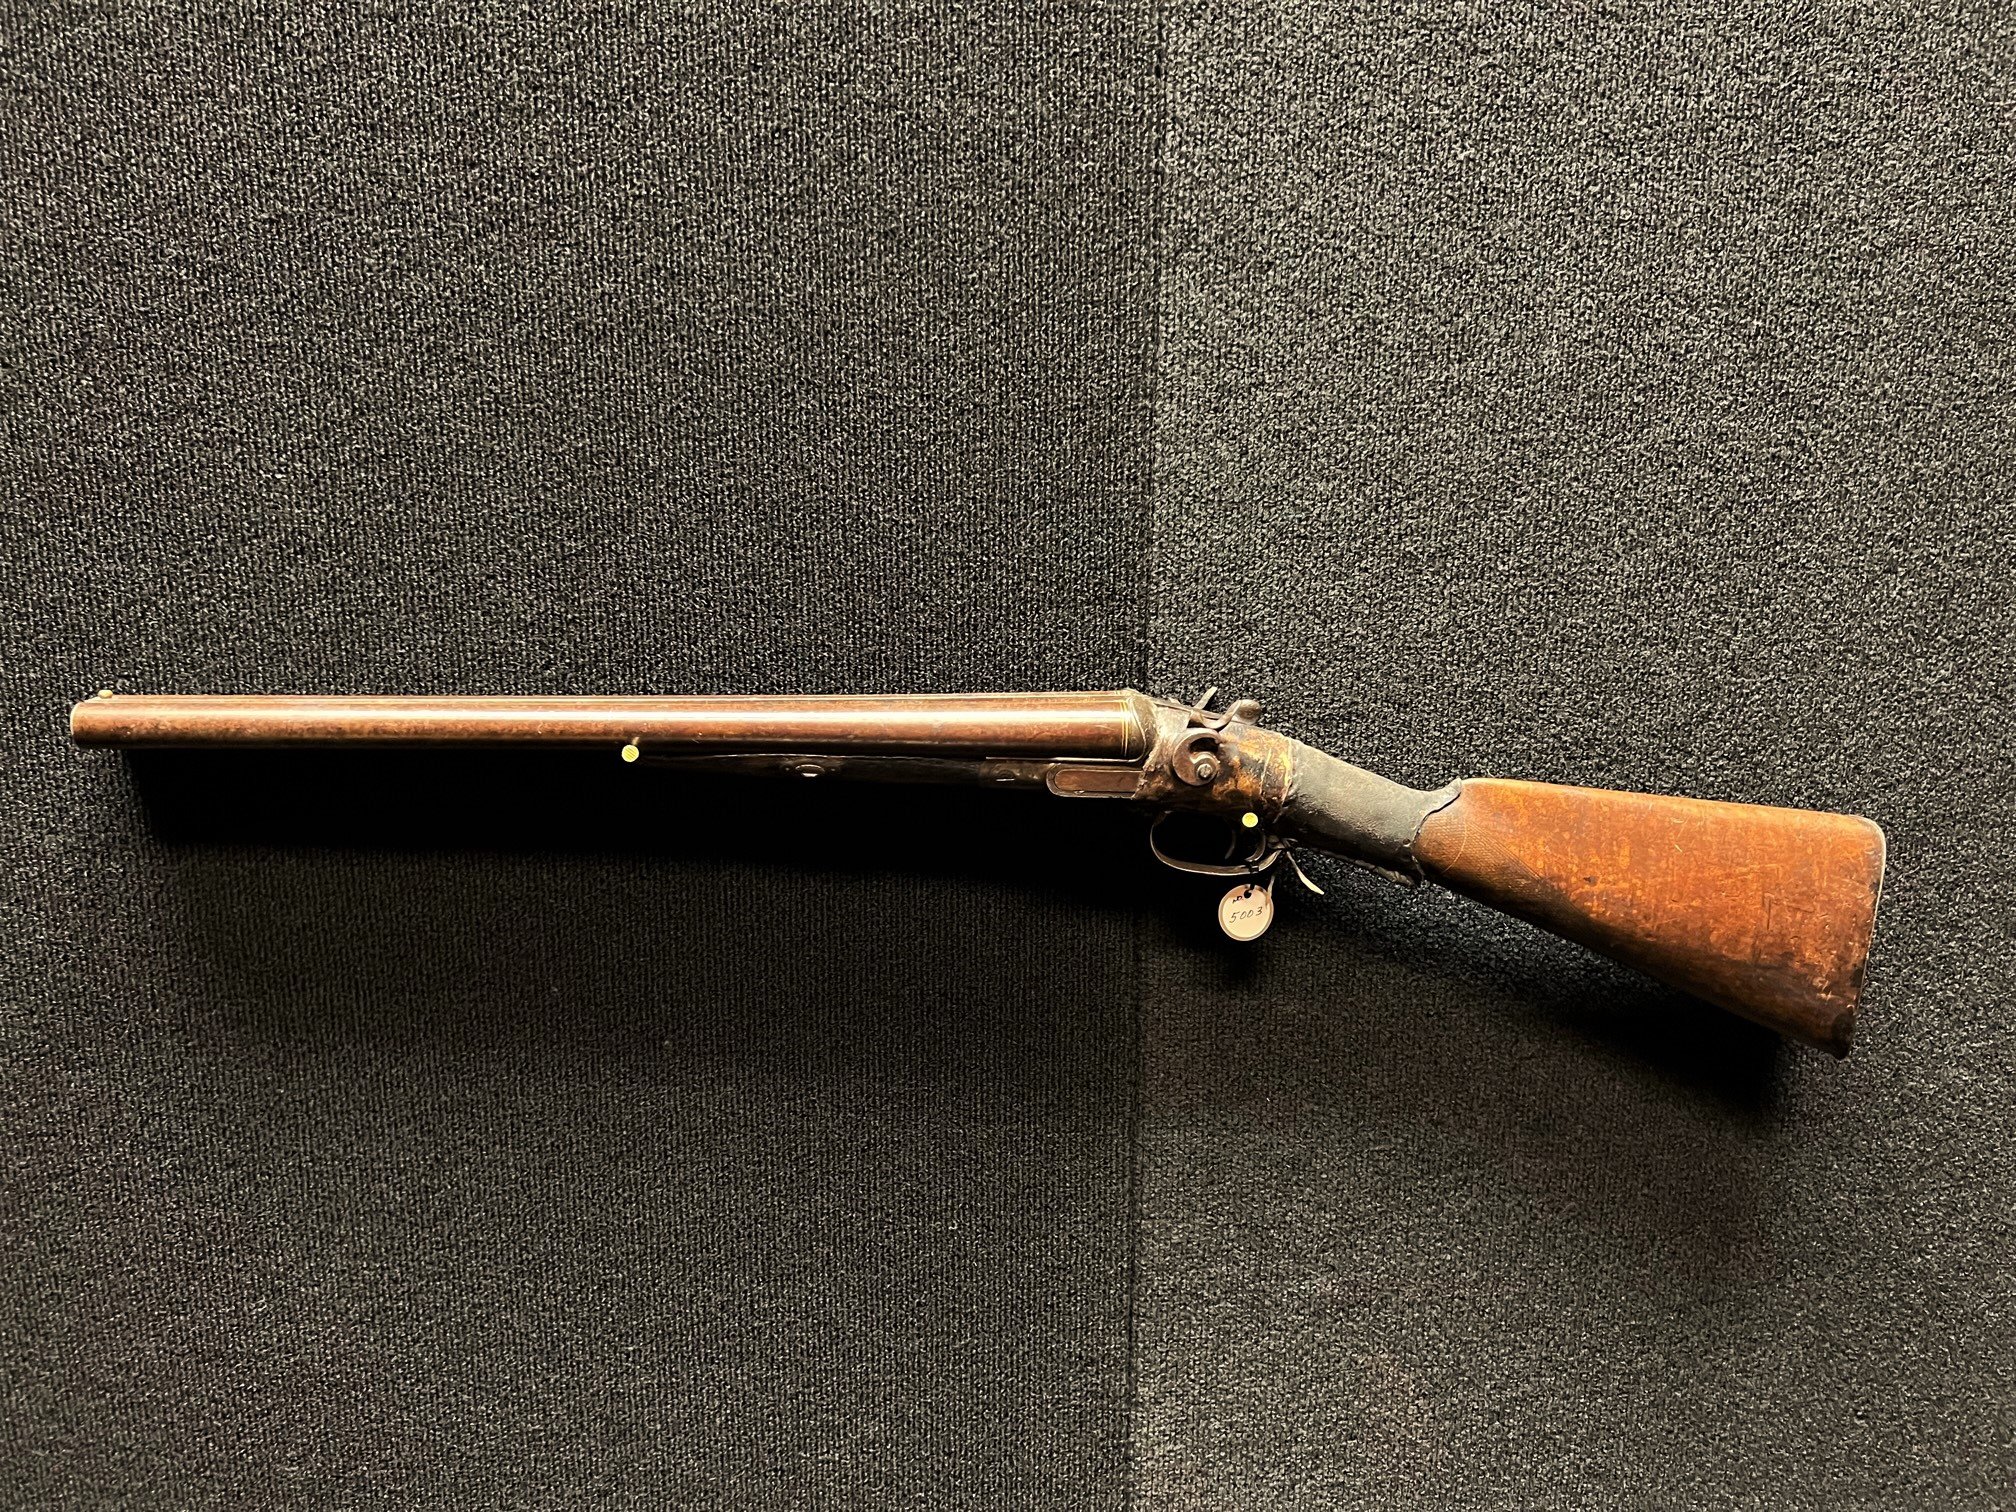 Traditional kentucky rifle and a gunpowder horn on an old, damaged board  Stock Photo